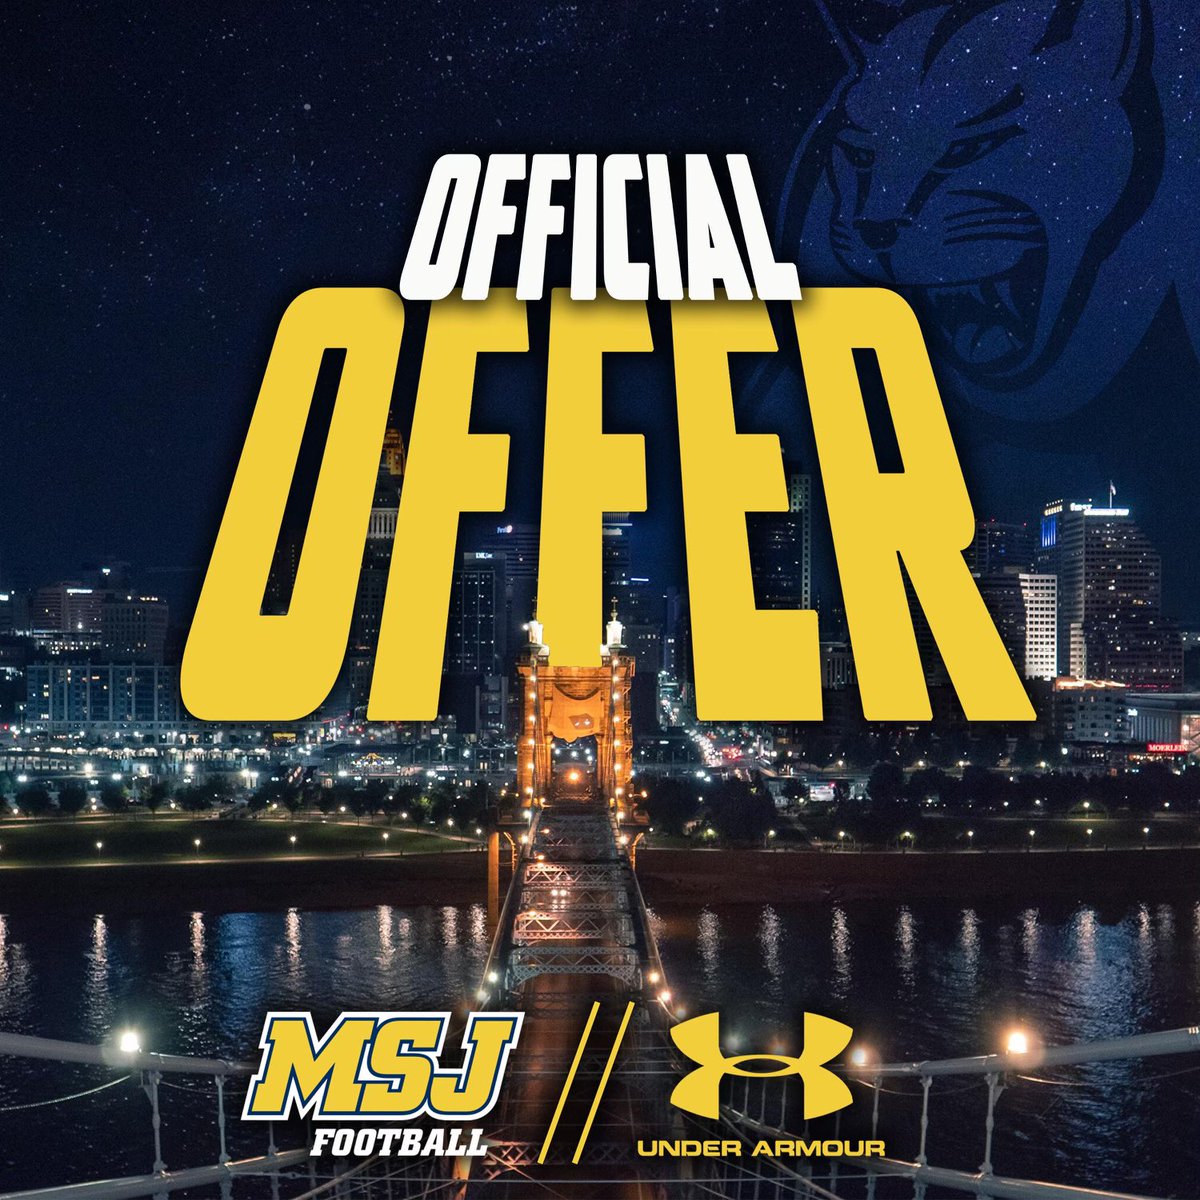 Blessed to receive an offer from Mount St. Joseph University! @CoachHopperton @CoachHines_13